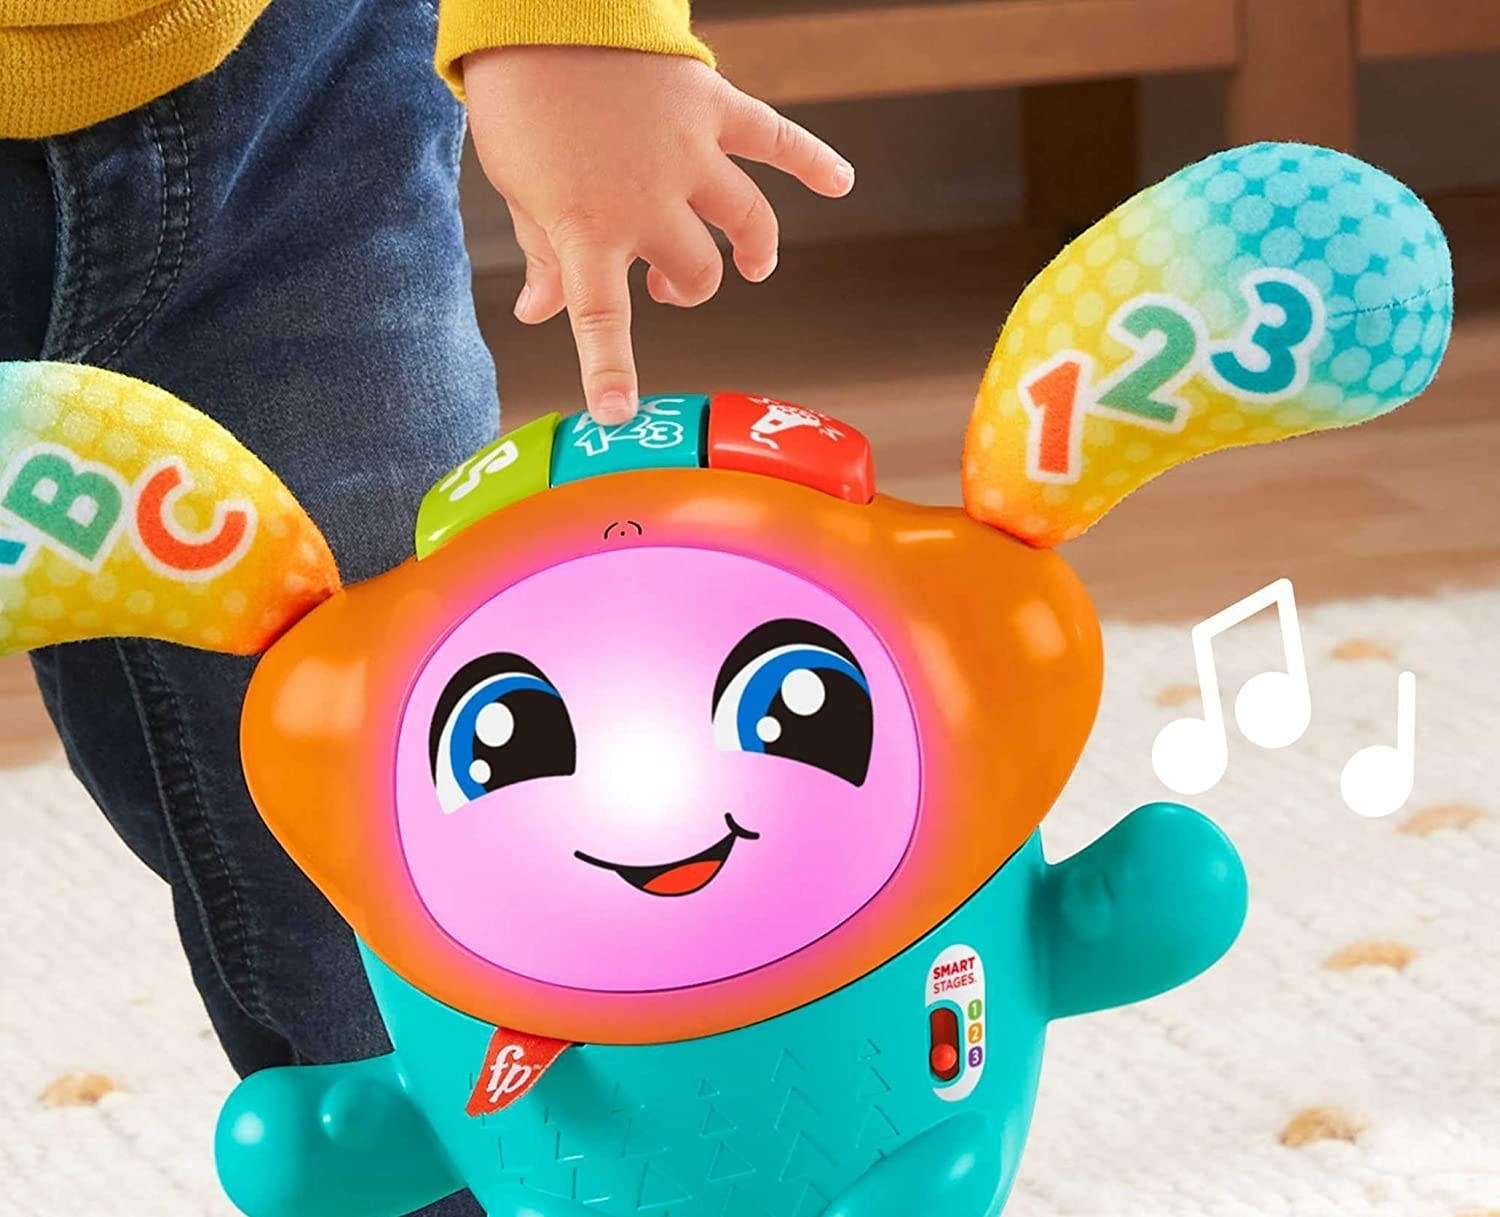 Child interacts with a colorful, musical learning toy with letters and numbers. Ideal for educational play